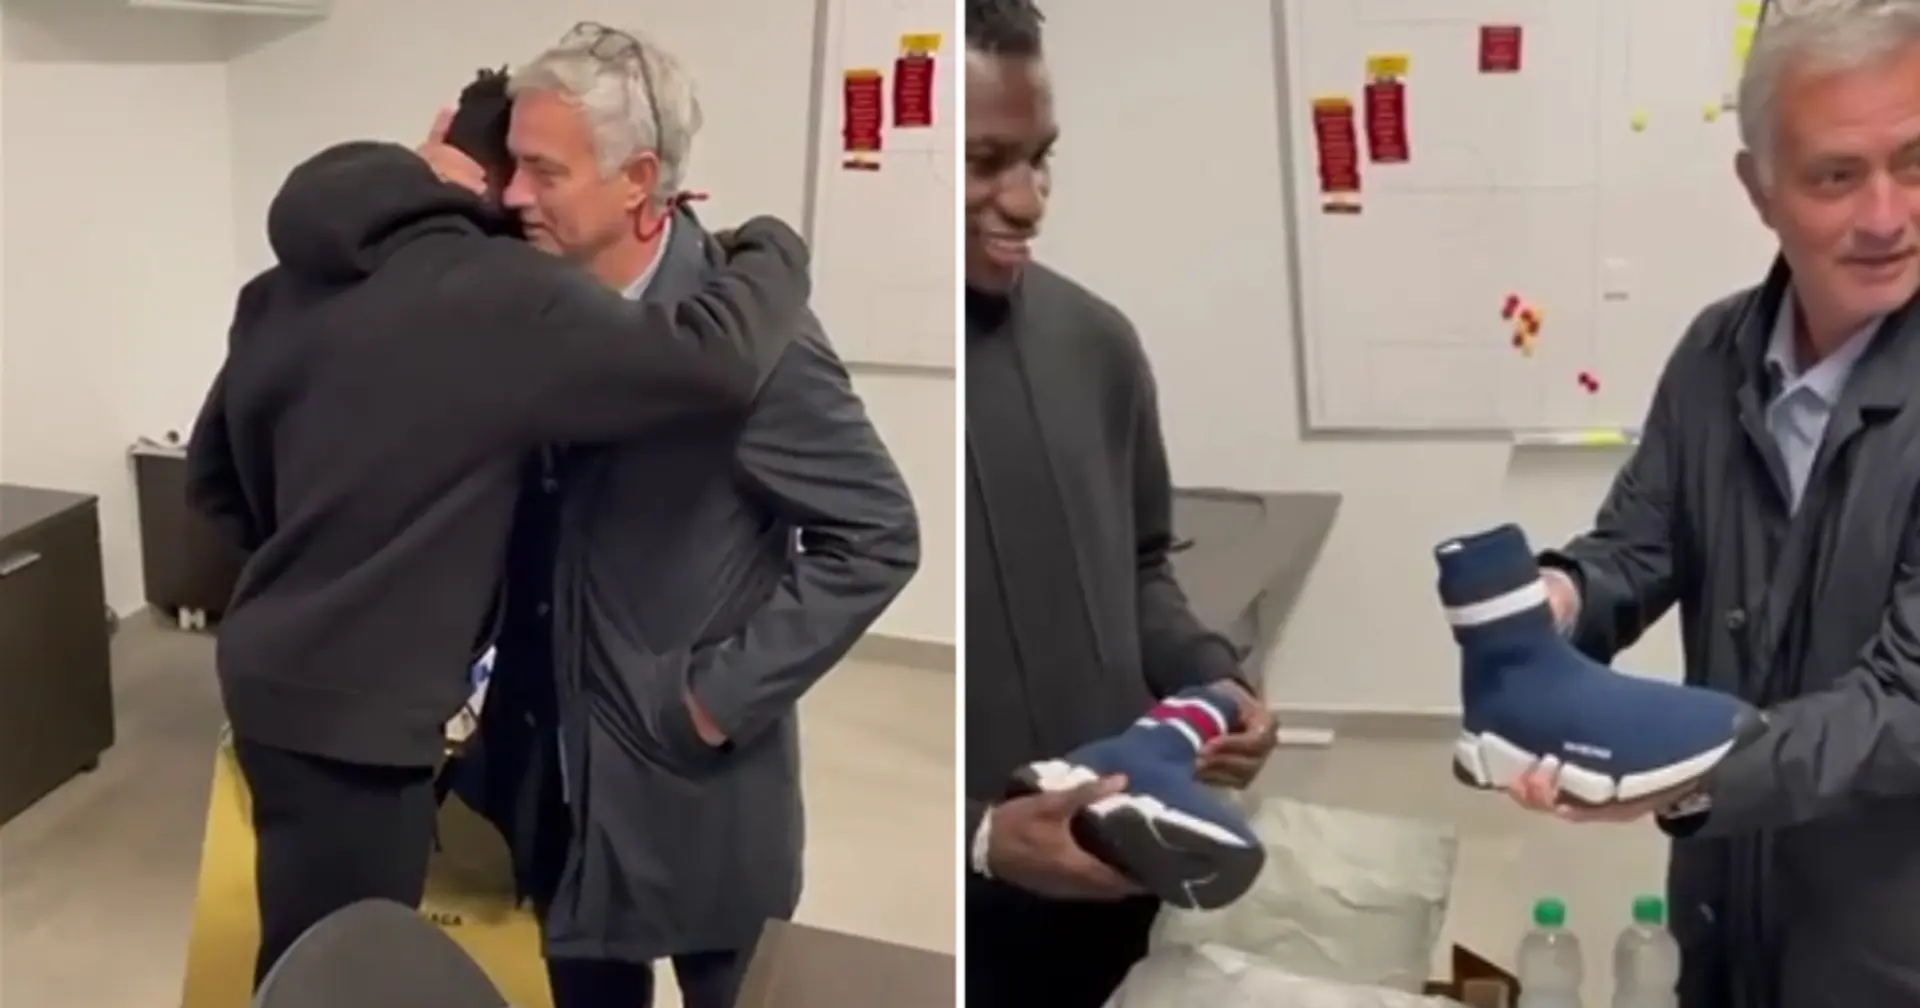 Promises kept: Jose Mourinho buys Roma youngster €800 shoes after first goals for senior team